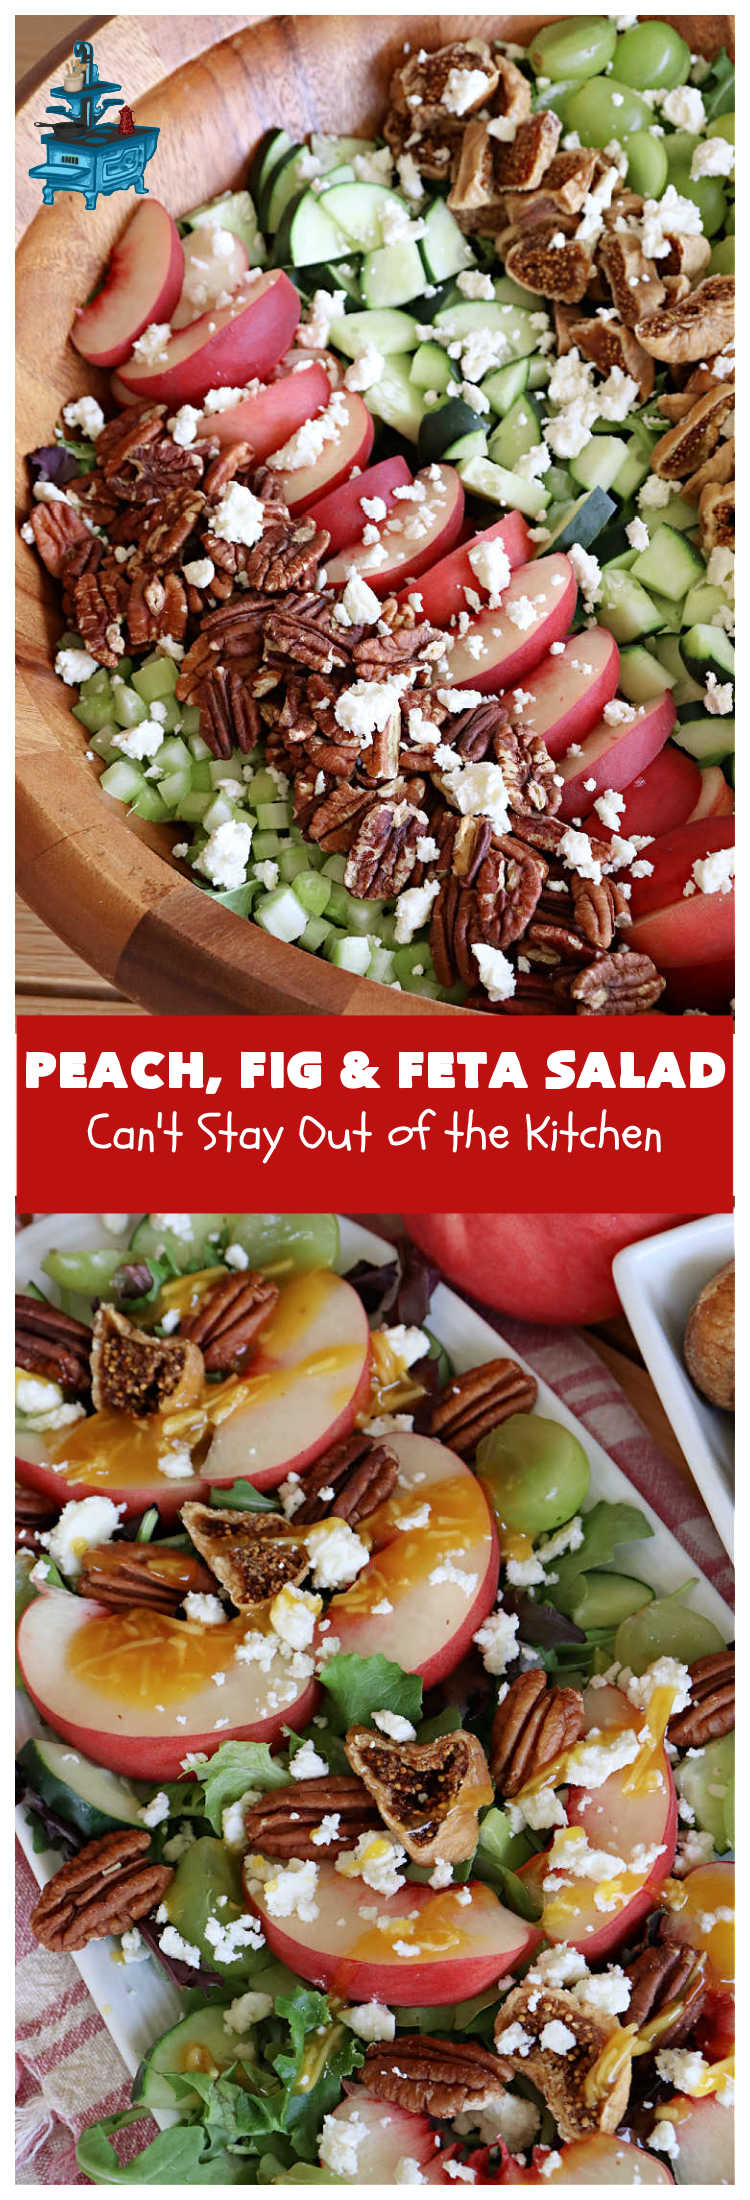 Peach, Fig & Feta Salad | Can't Stay Out of the Kitchen | this delicious gourmet-type #salad is fantastic for company or #holiday dinners. The sweetness comes from #peaches, #figs & #grapes. The savory flavors come from #FetaCheese & roasted #pecans. #Healthy #LowCalorie #GlutenFree  #PeachFigAndFetaSalad